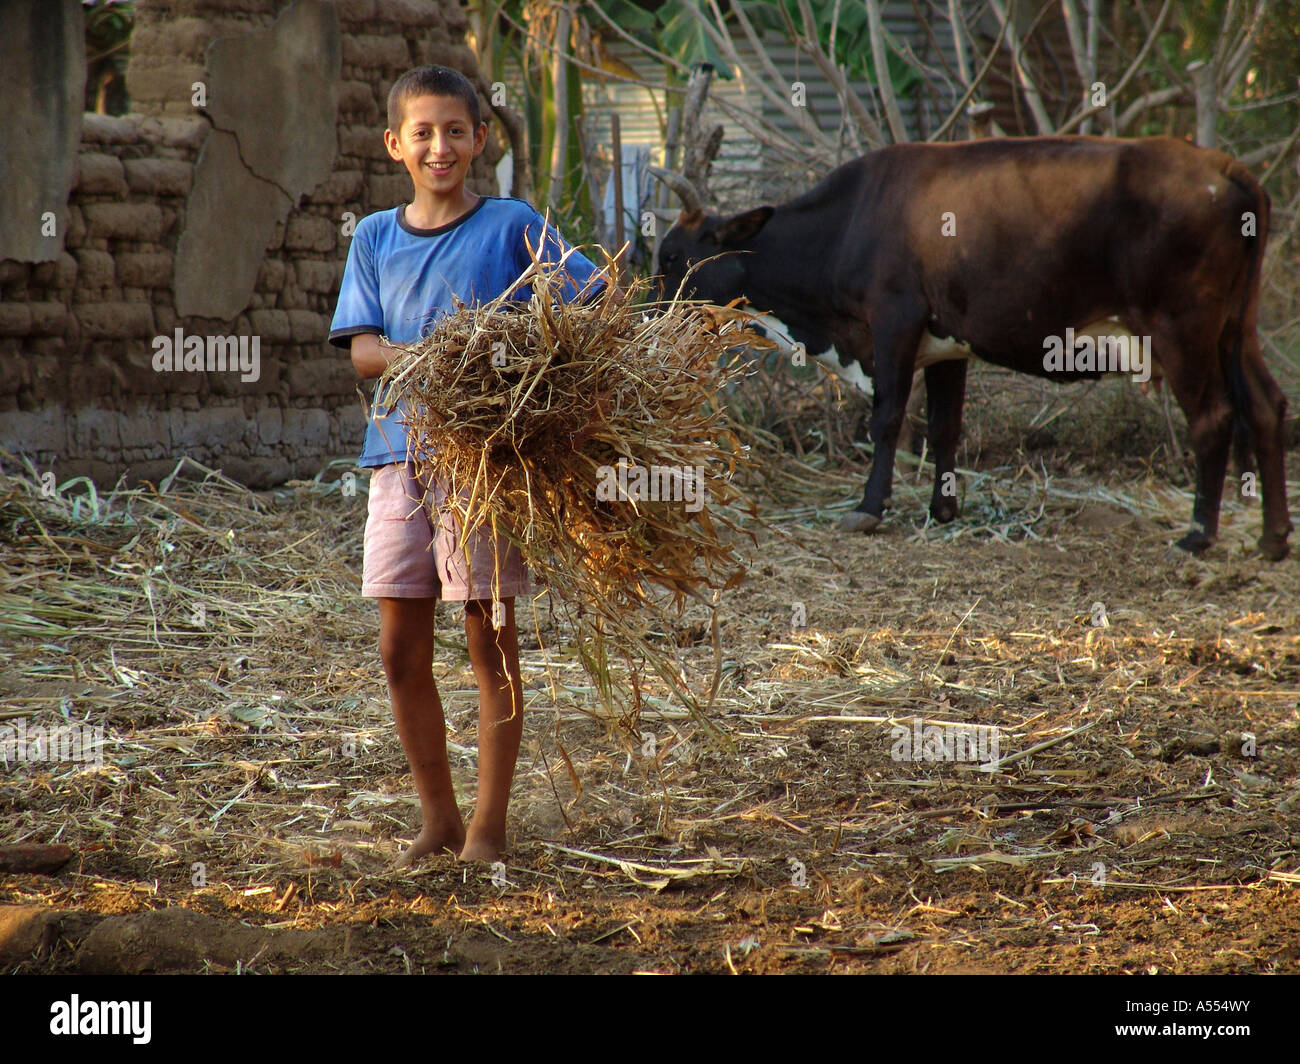 Painet ip2500 salvador boy feeding cows san francsisco javier country developing nation less economically developed culture Stock Photo